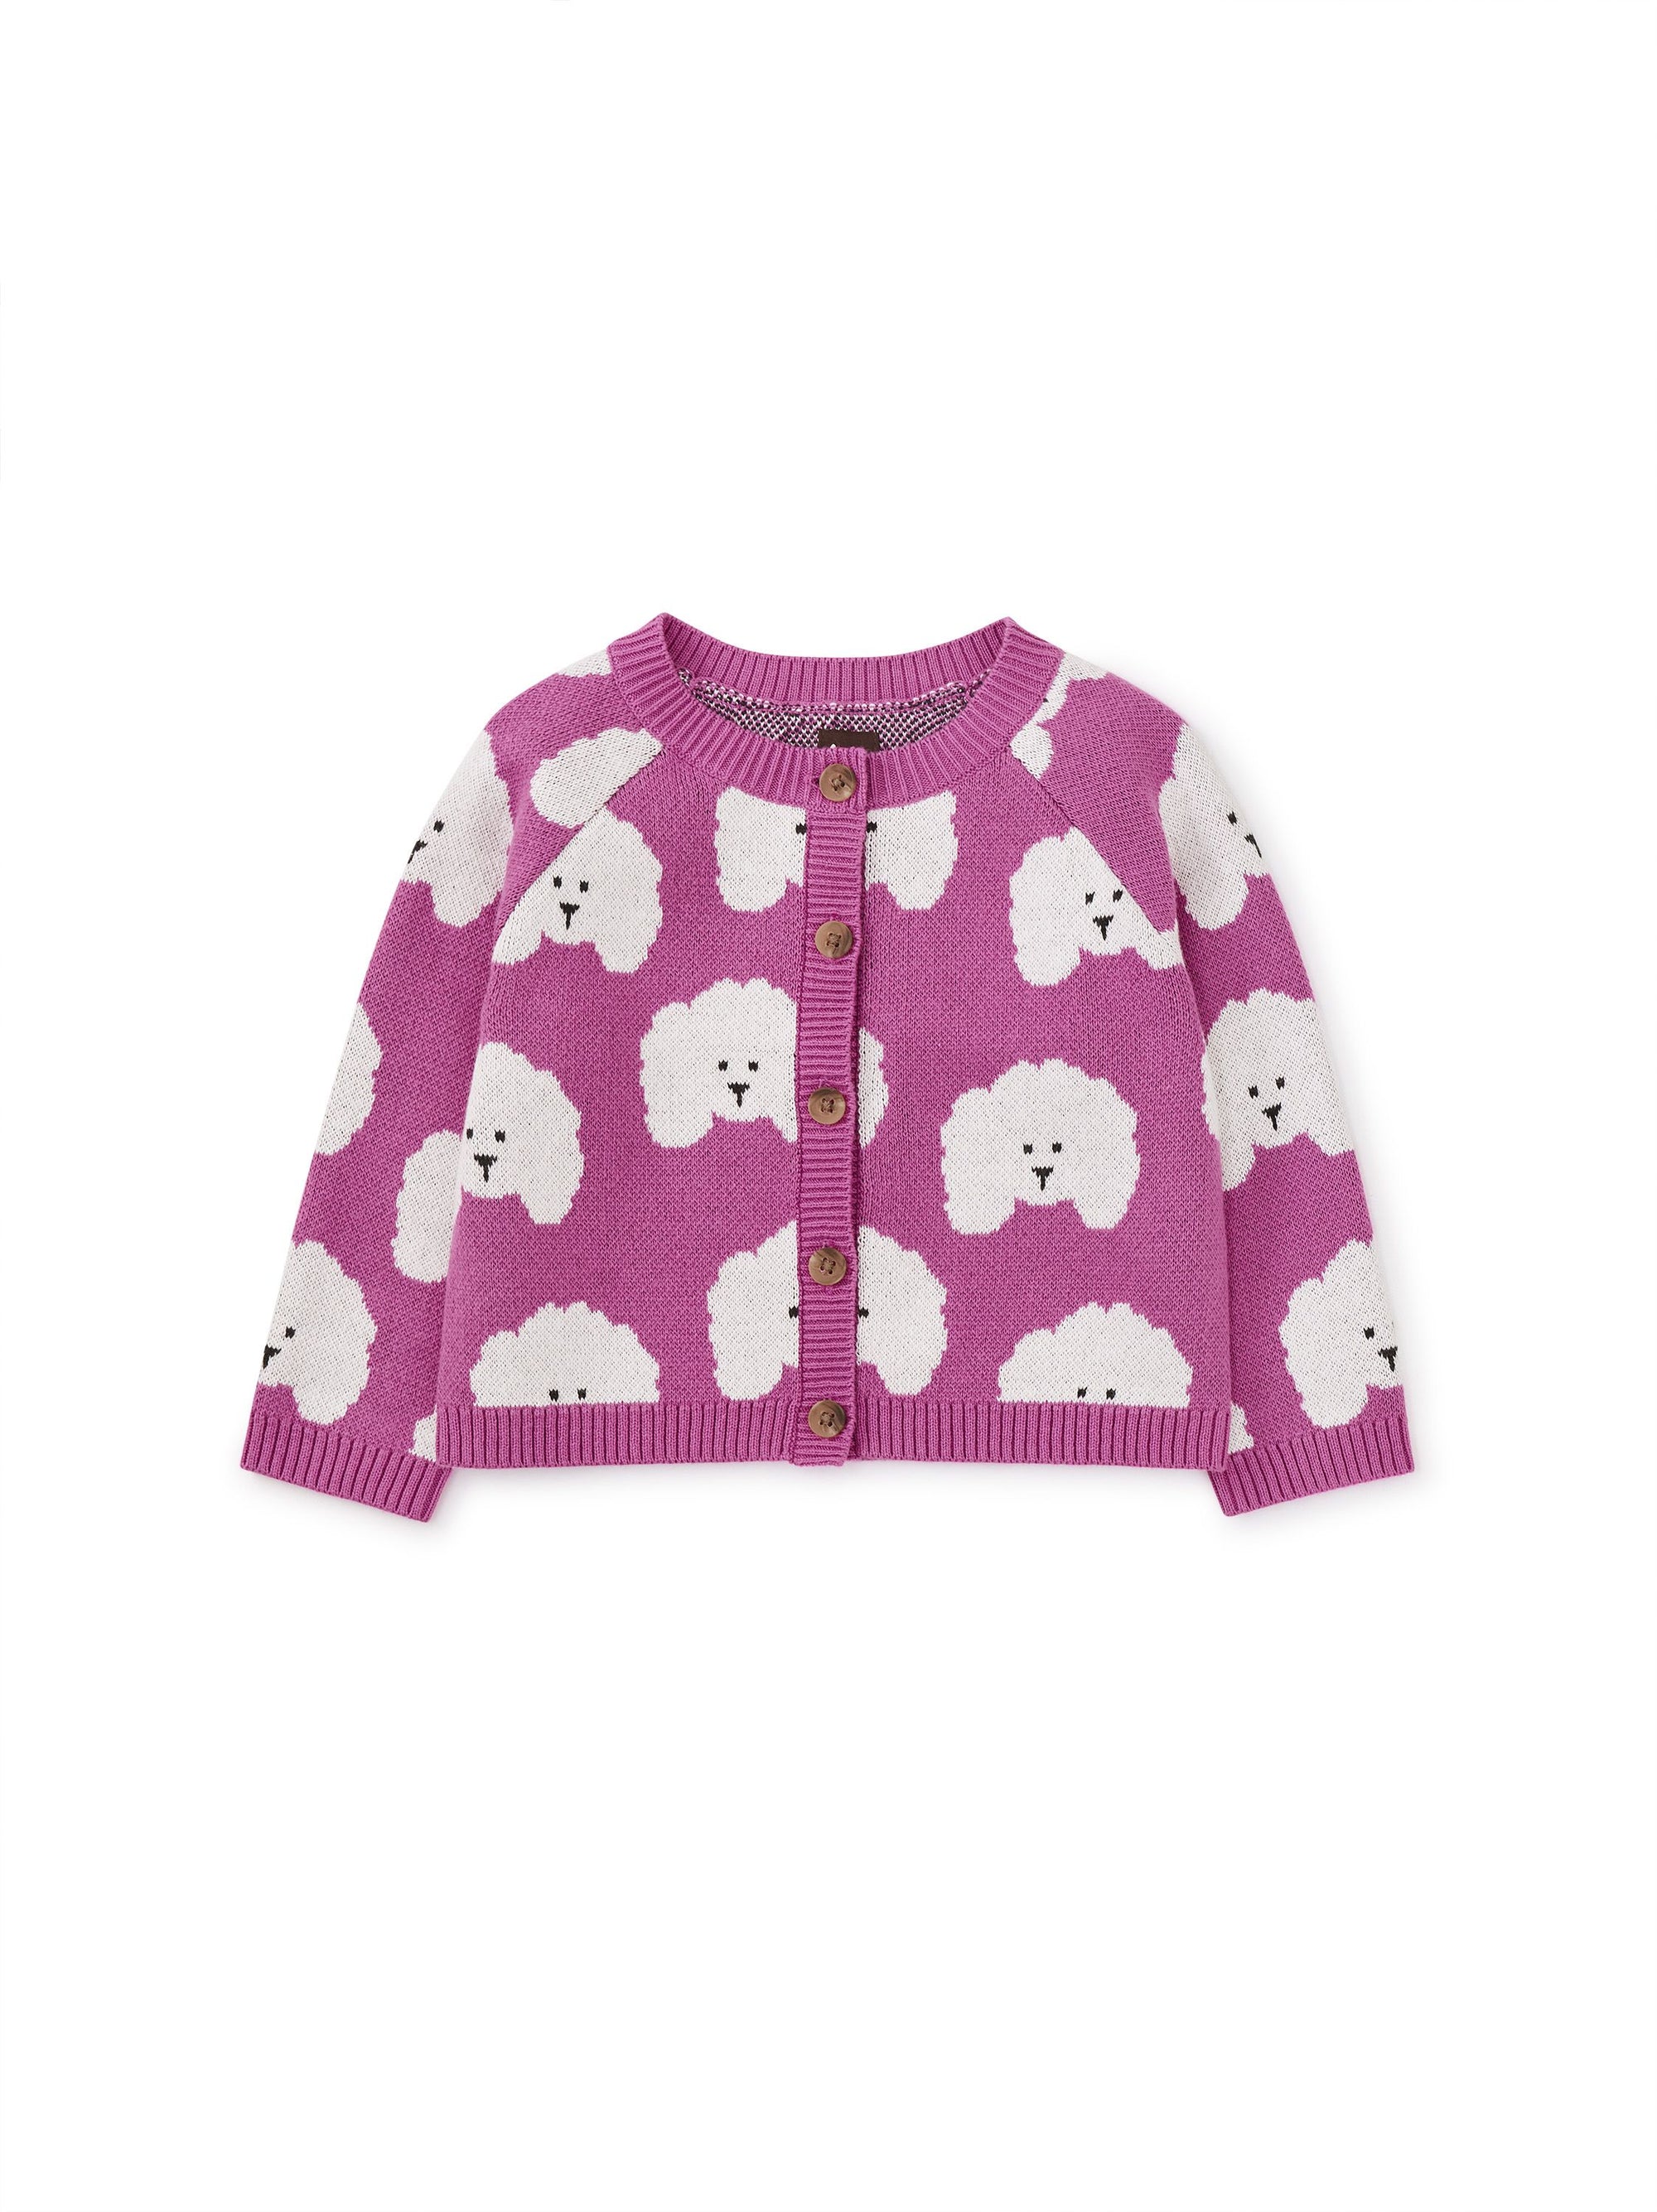 Iconic Baby Cardigan - Poodle Party